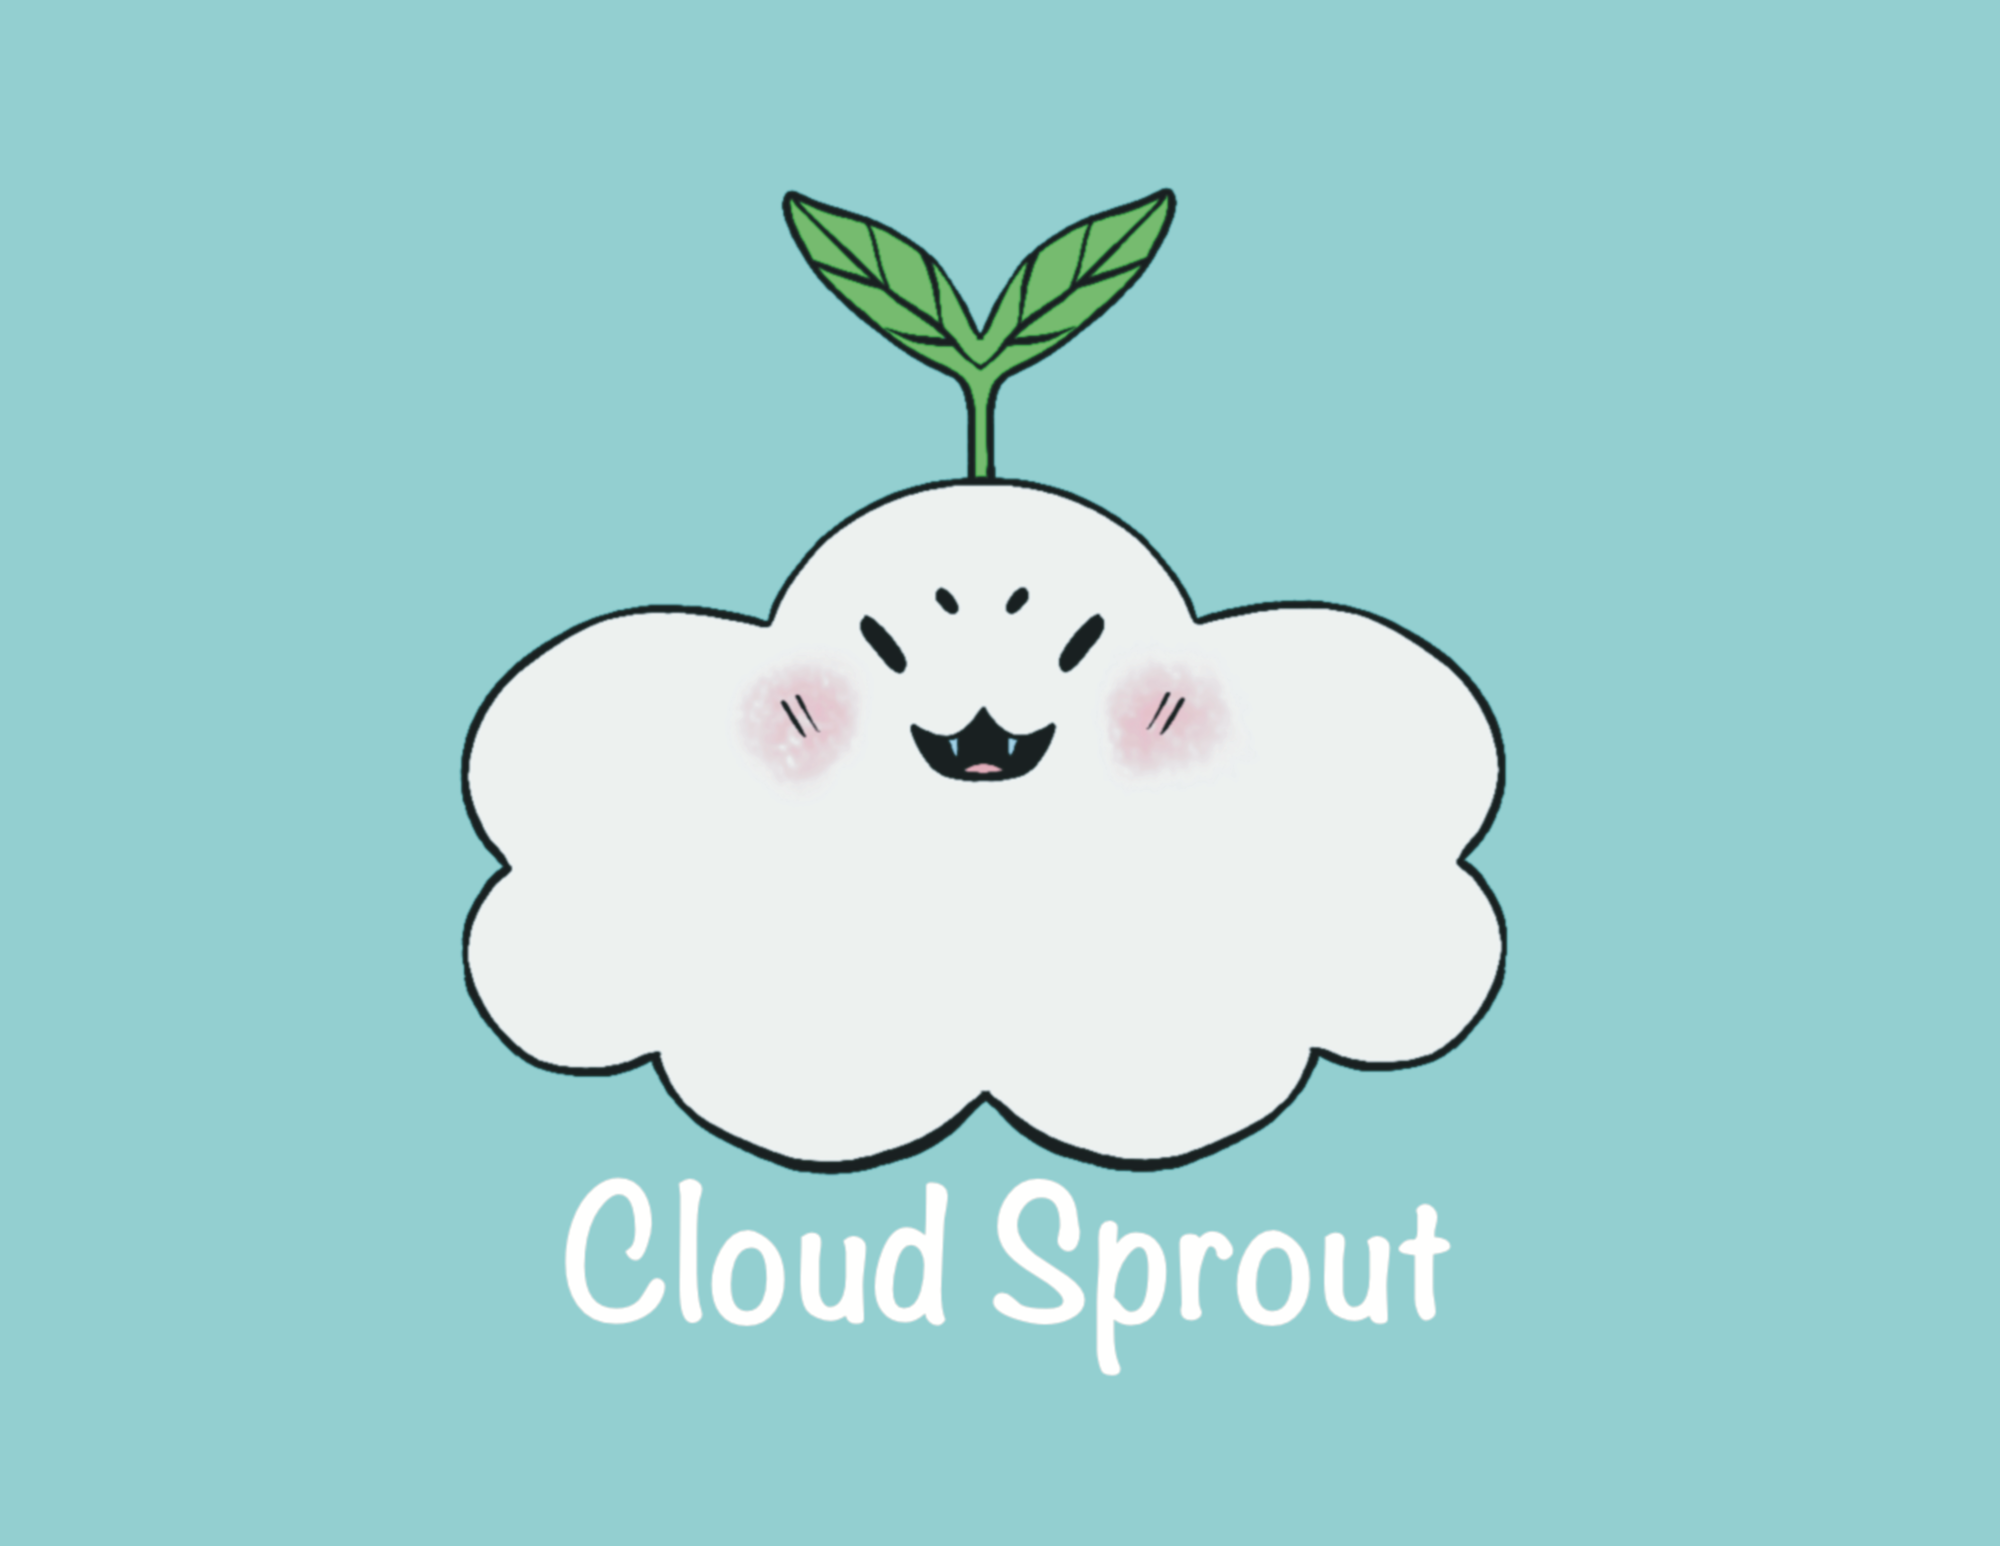 Cloud Sprout